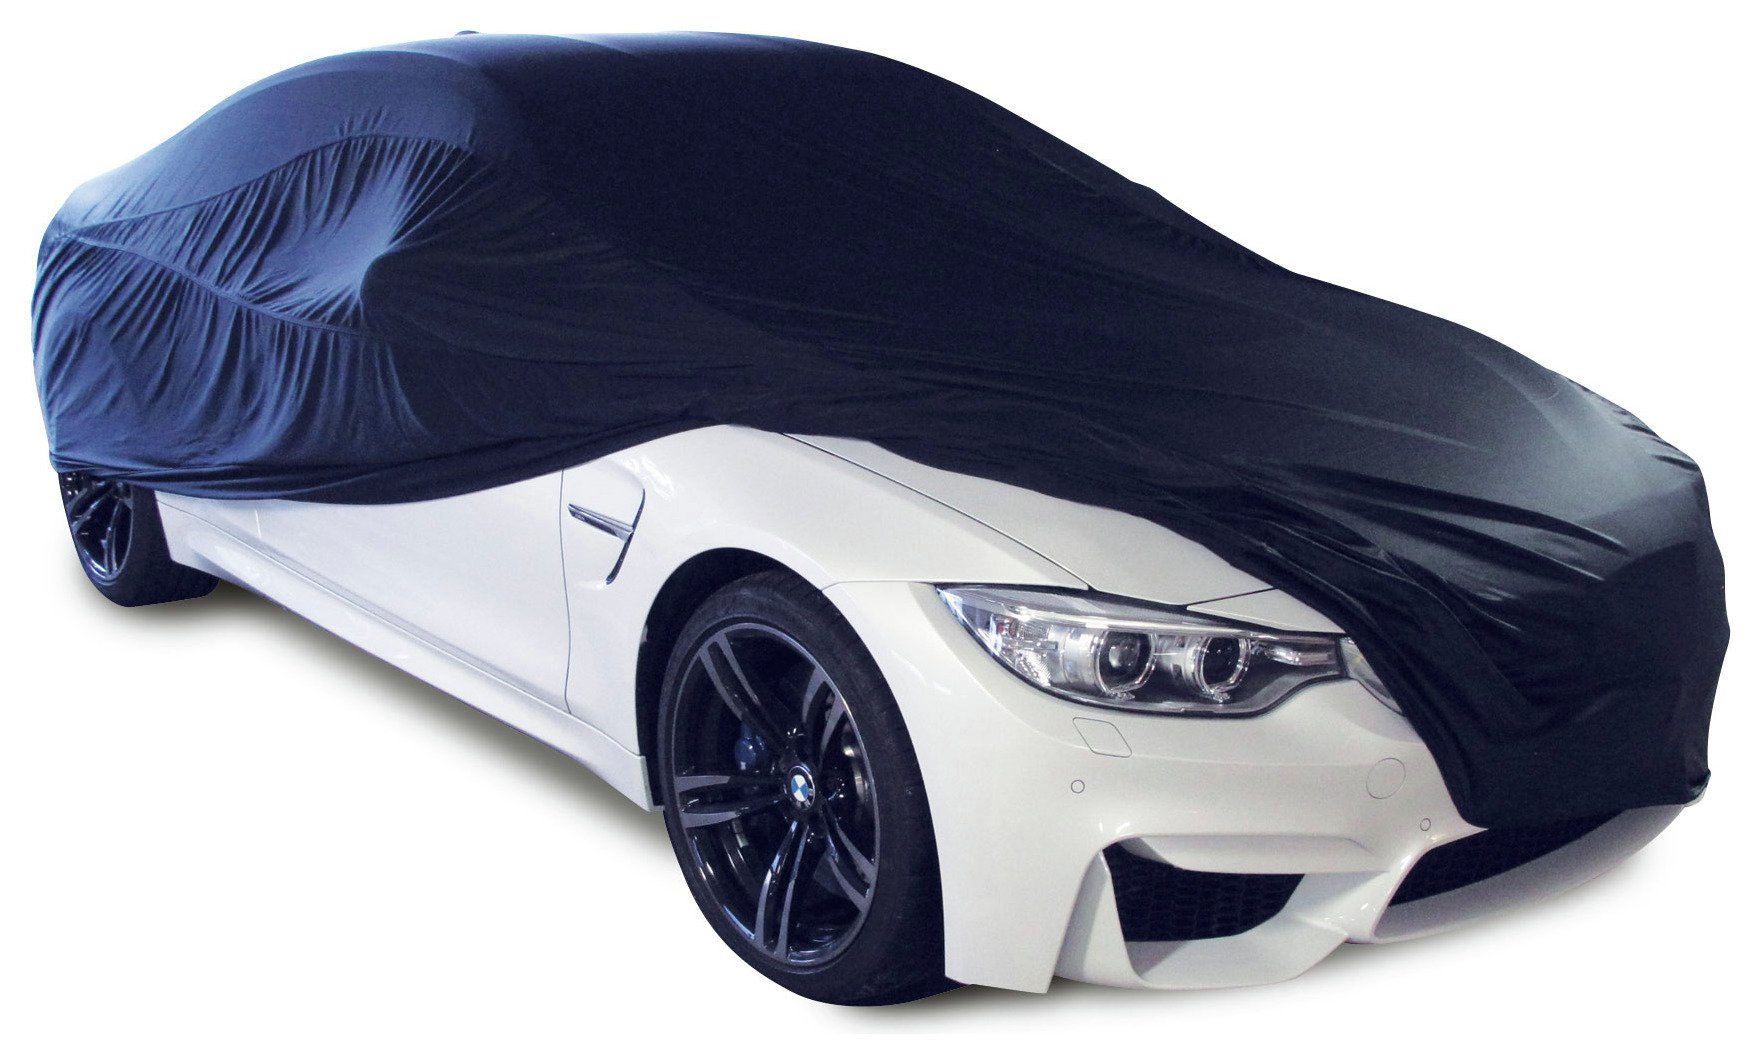 Cosmos Black Indoor Car Cover - Large. Review